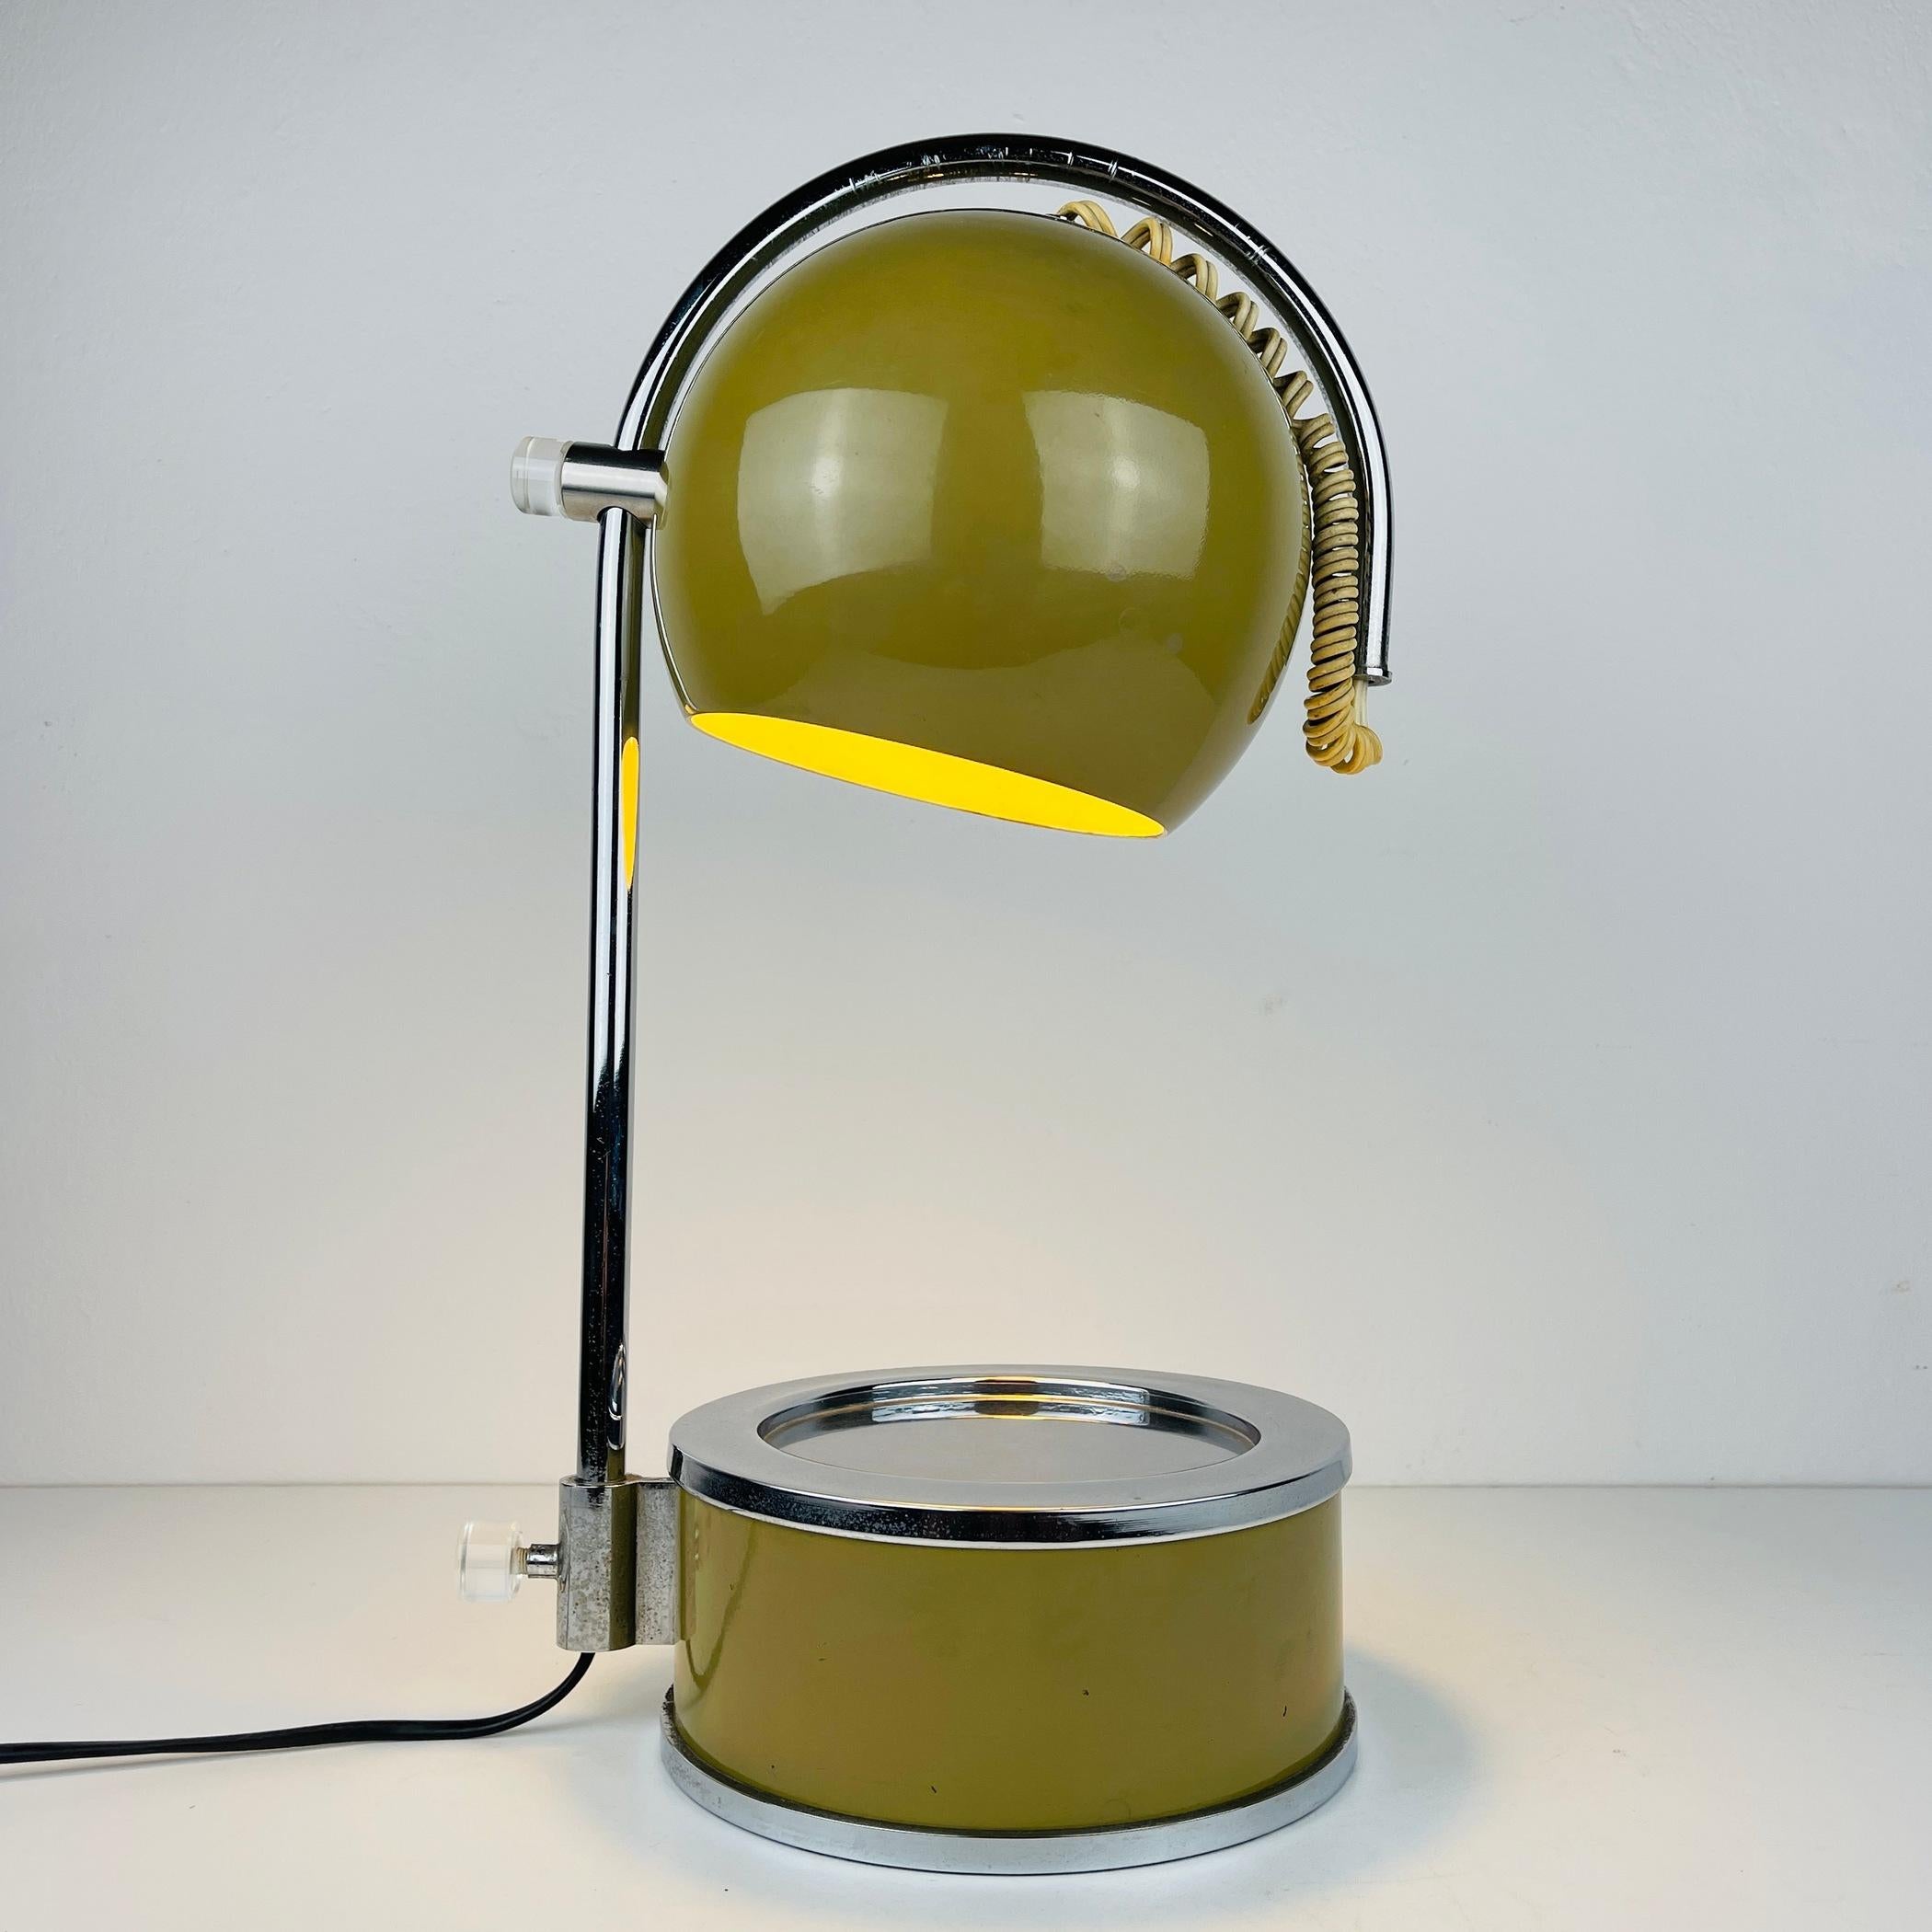 Step back in time to the swinging '60s with this stylish Italian vintage adjustable desk lamp. Crafted entirely from metal, this lamp exudes an authentic retro charm that's sure to make a statement in your space. The lamp's fully rotatable design